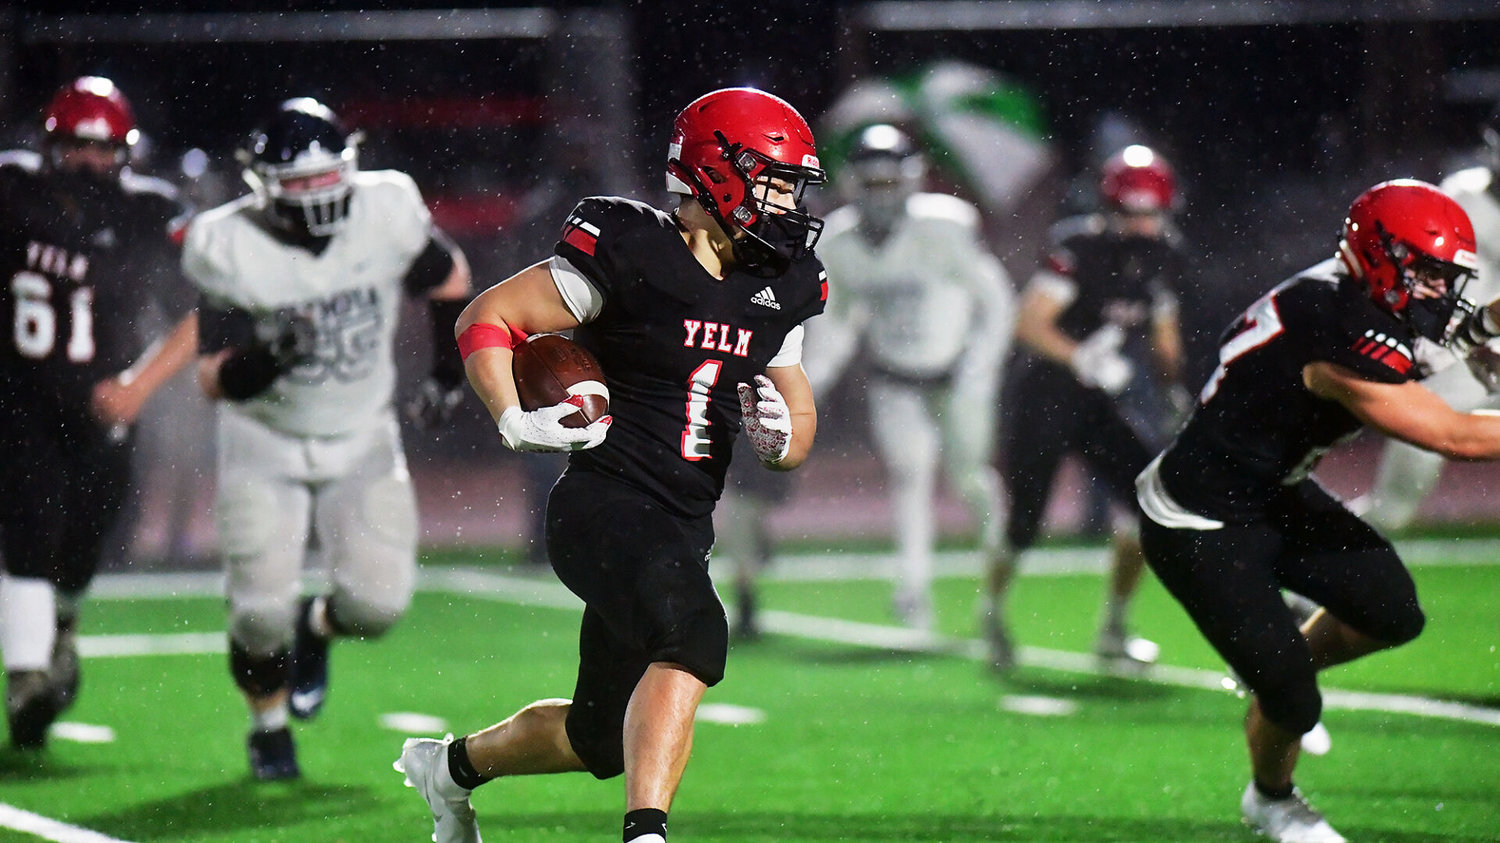 Yelm High School running back Ray Wright sprints for good yardage against Olympia High School on Friday, Feb. 19, at the YHS stadium.